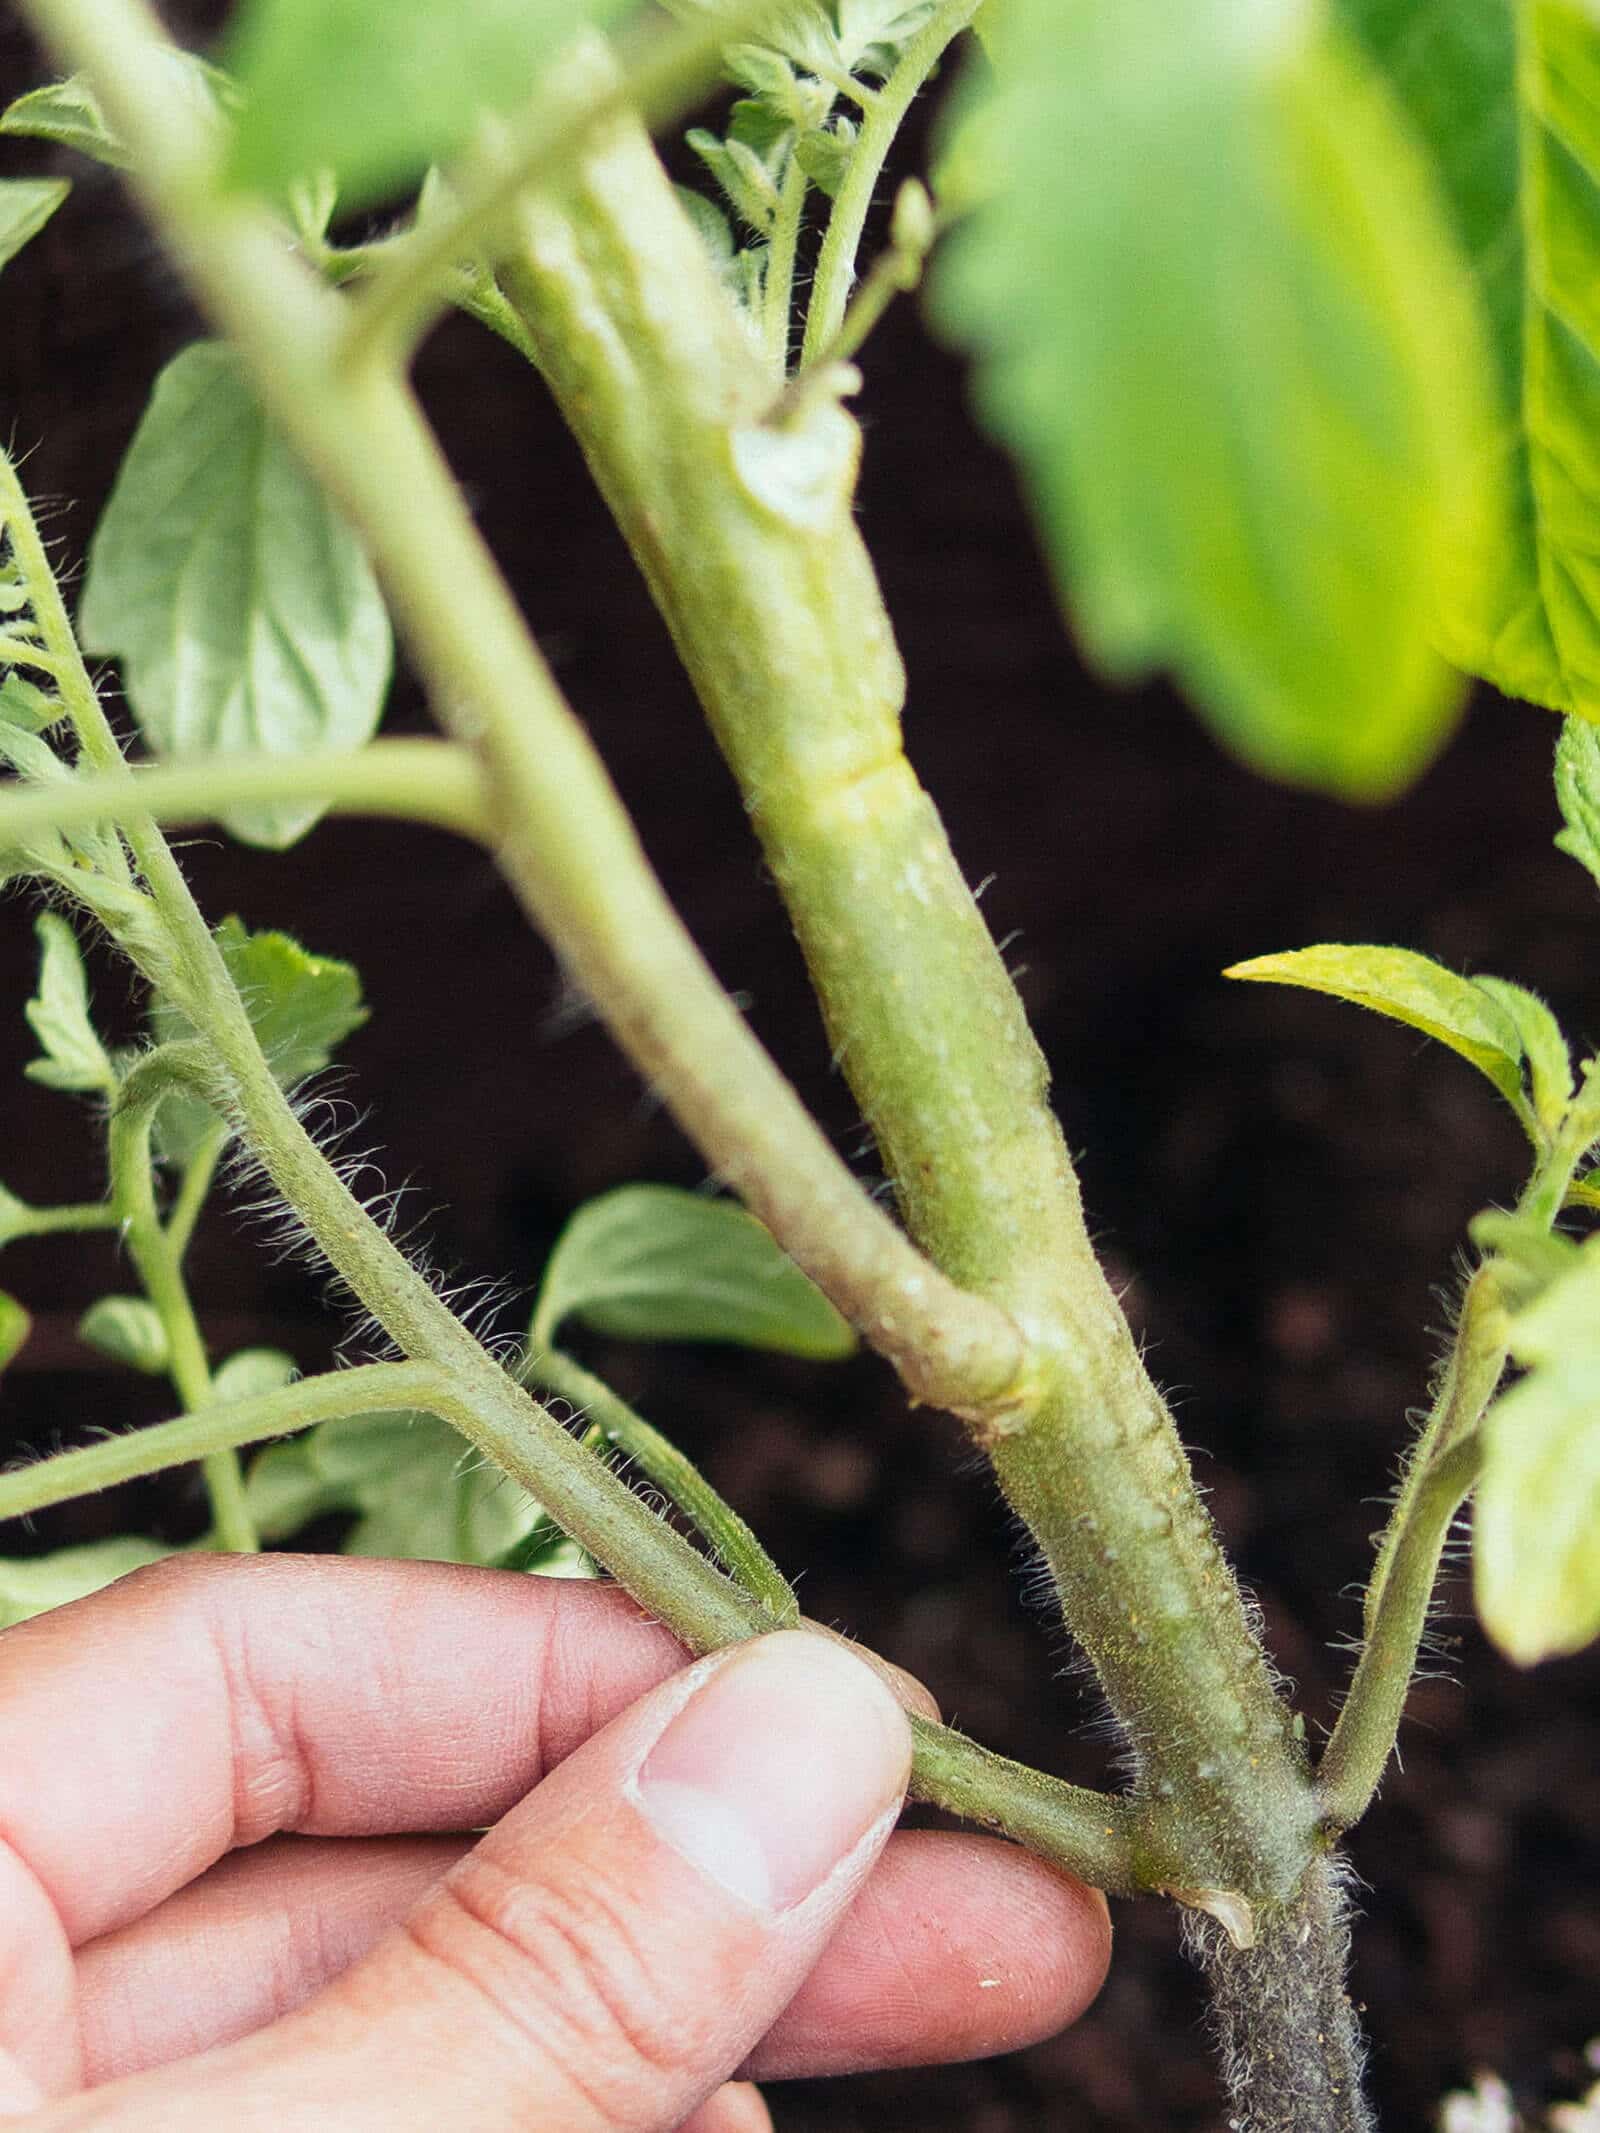 Each tiny bump on a tomato stem has the ability to form an adventitious root